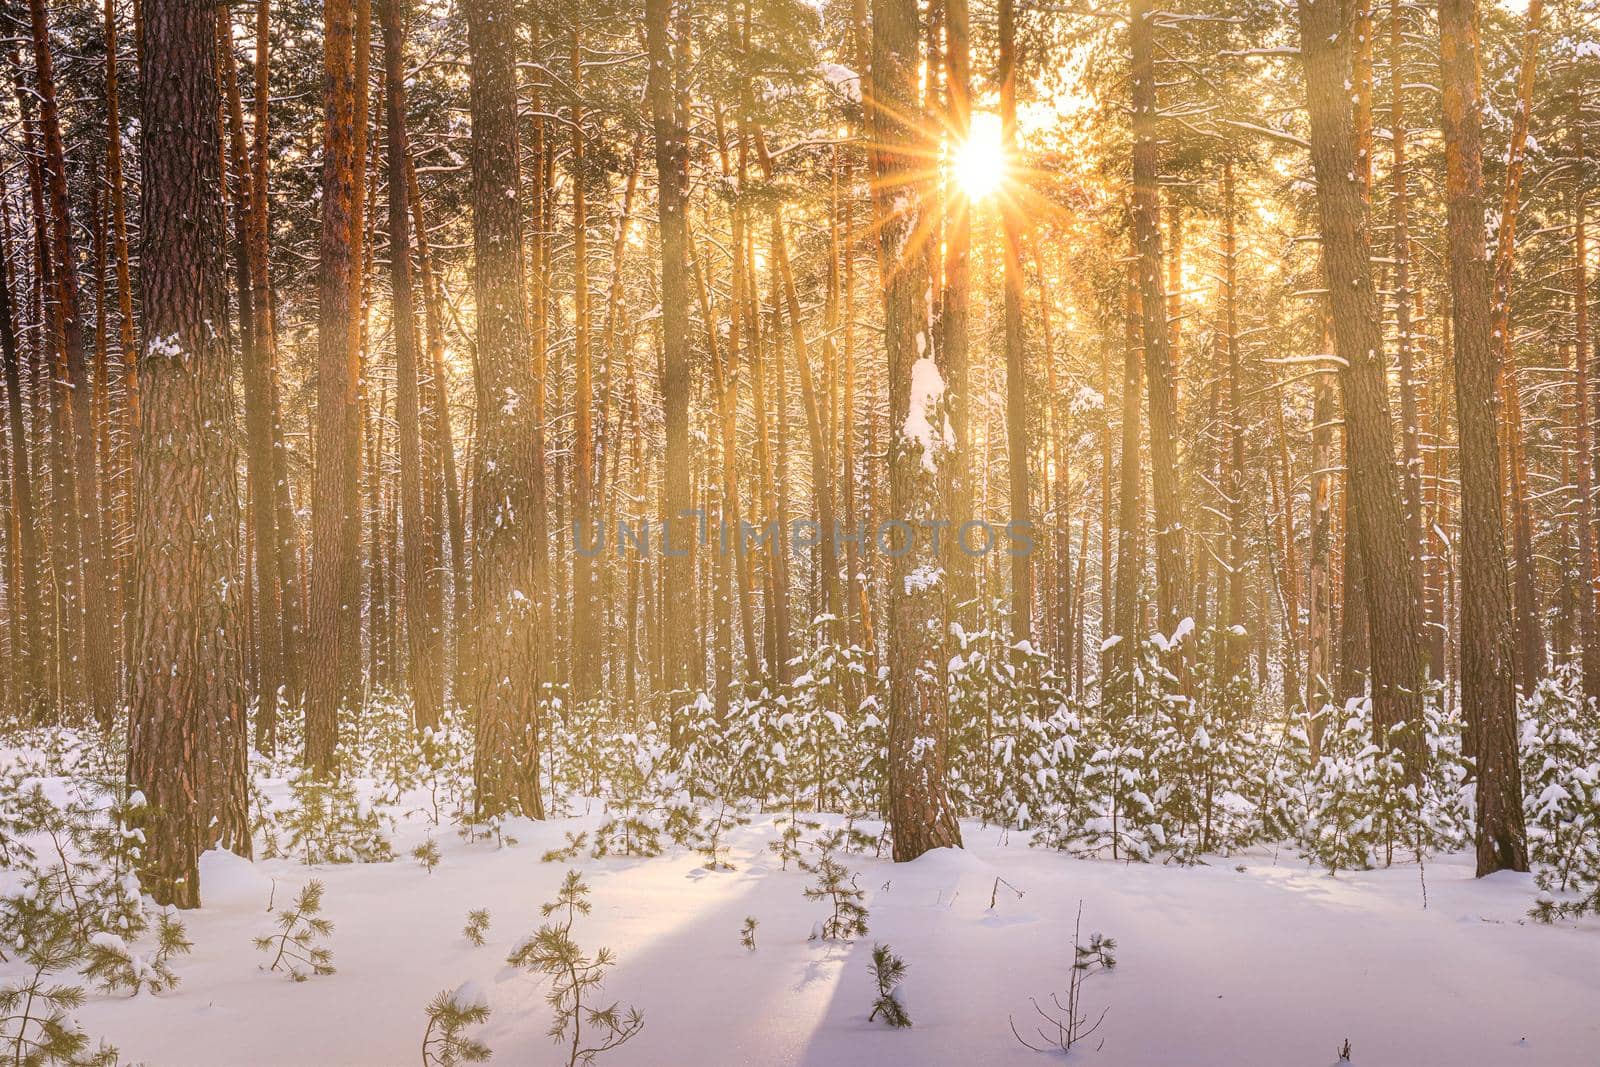 Sunset or sunrise in the winter pine forest covered with a snow. Rows of pine trunks with the sun's rays passing through them. Snowfall.